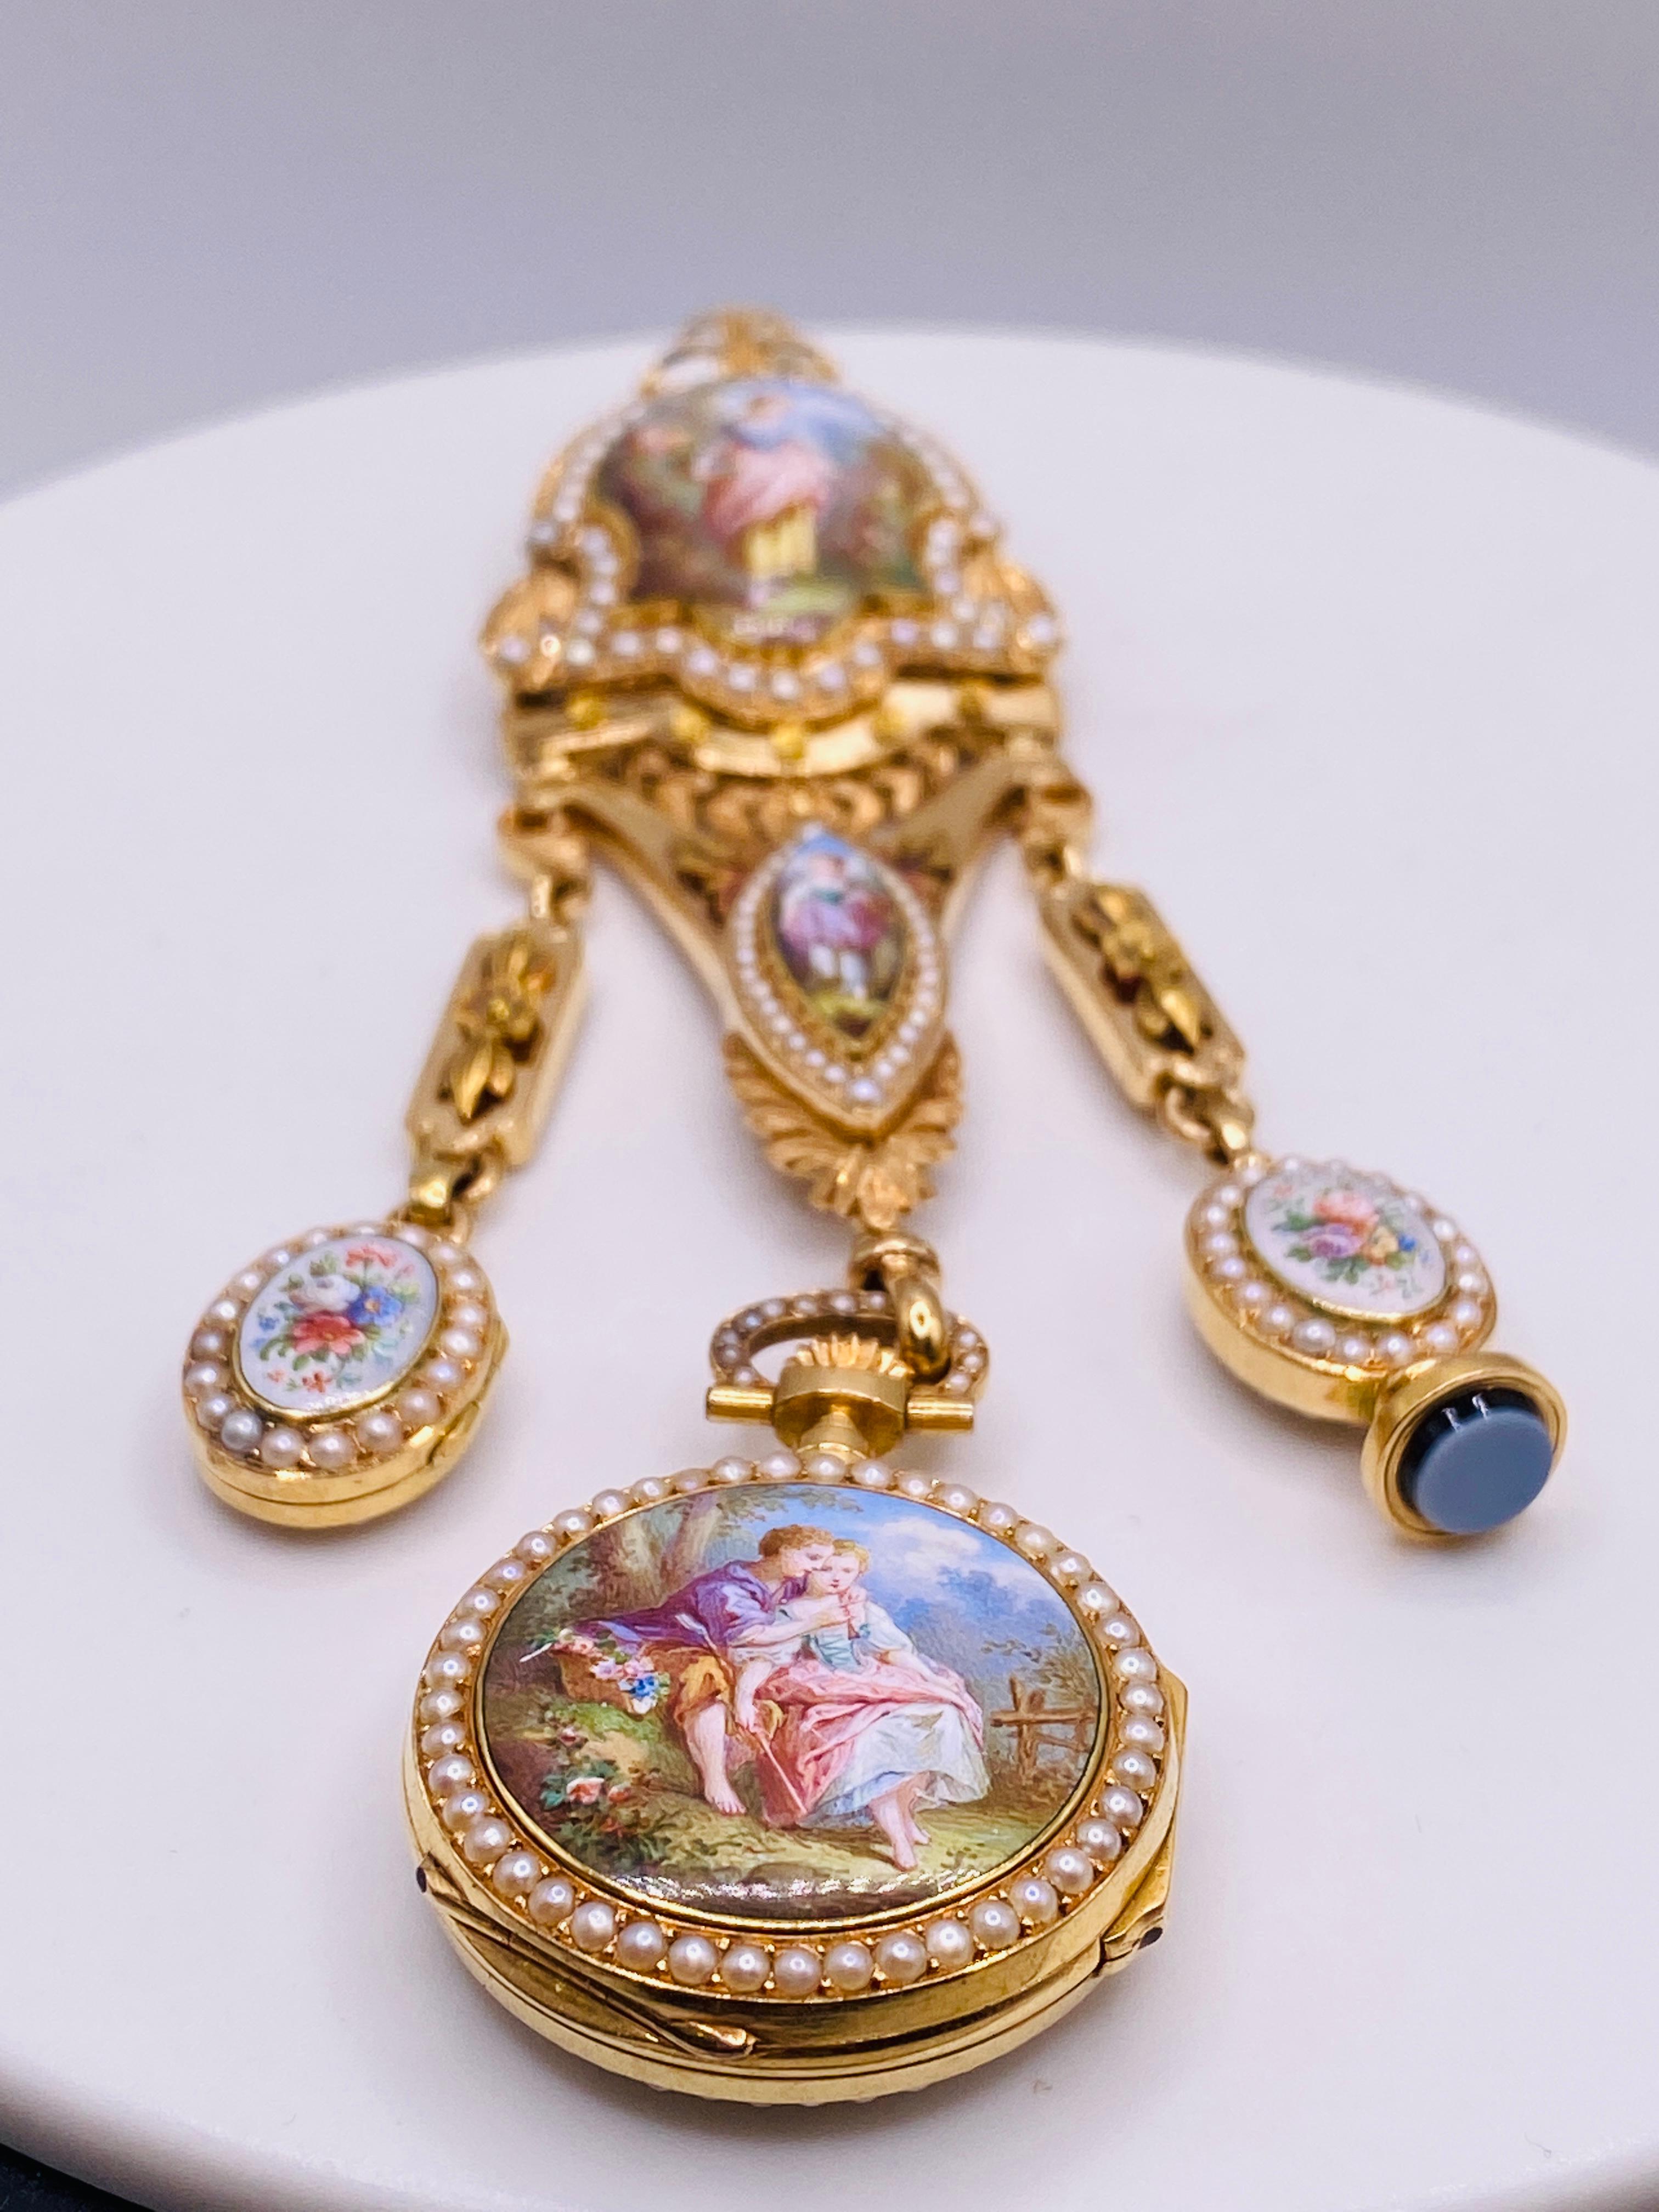 Antique early 19th century enamel and seed pearl 14k yellow gold pendant watch. Previous lapel pin removed and hidden bail placed for wearing as a pendant. Length from bail to bottom of watch is 125mm, width is approx. 30 mm. 41.1Dwt